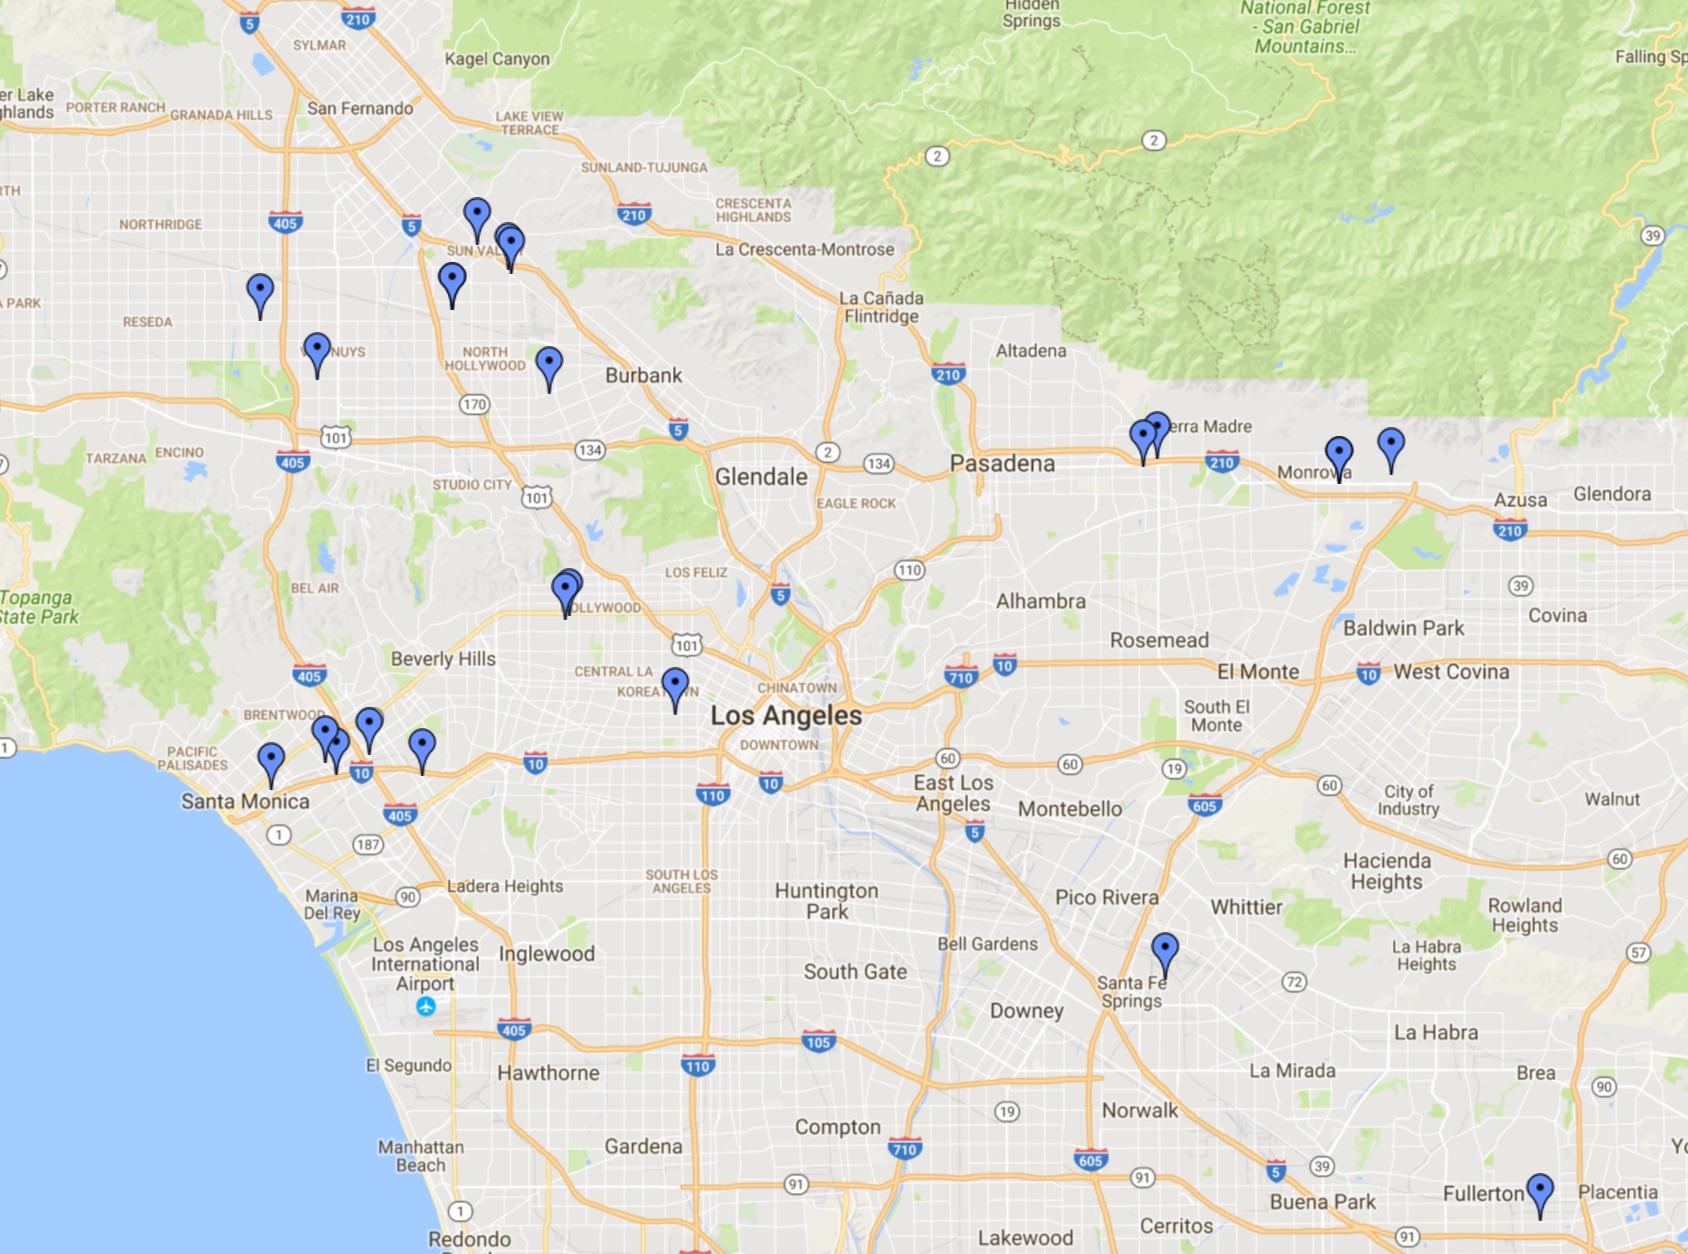 Map of Southern California with several locations marked with blue pins